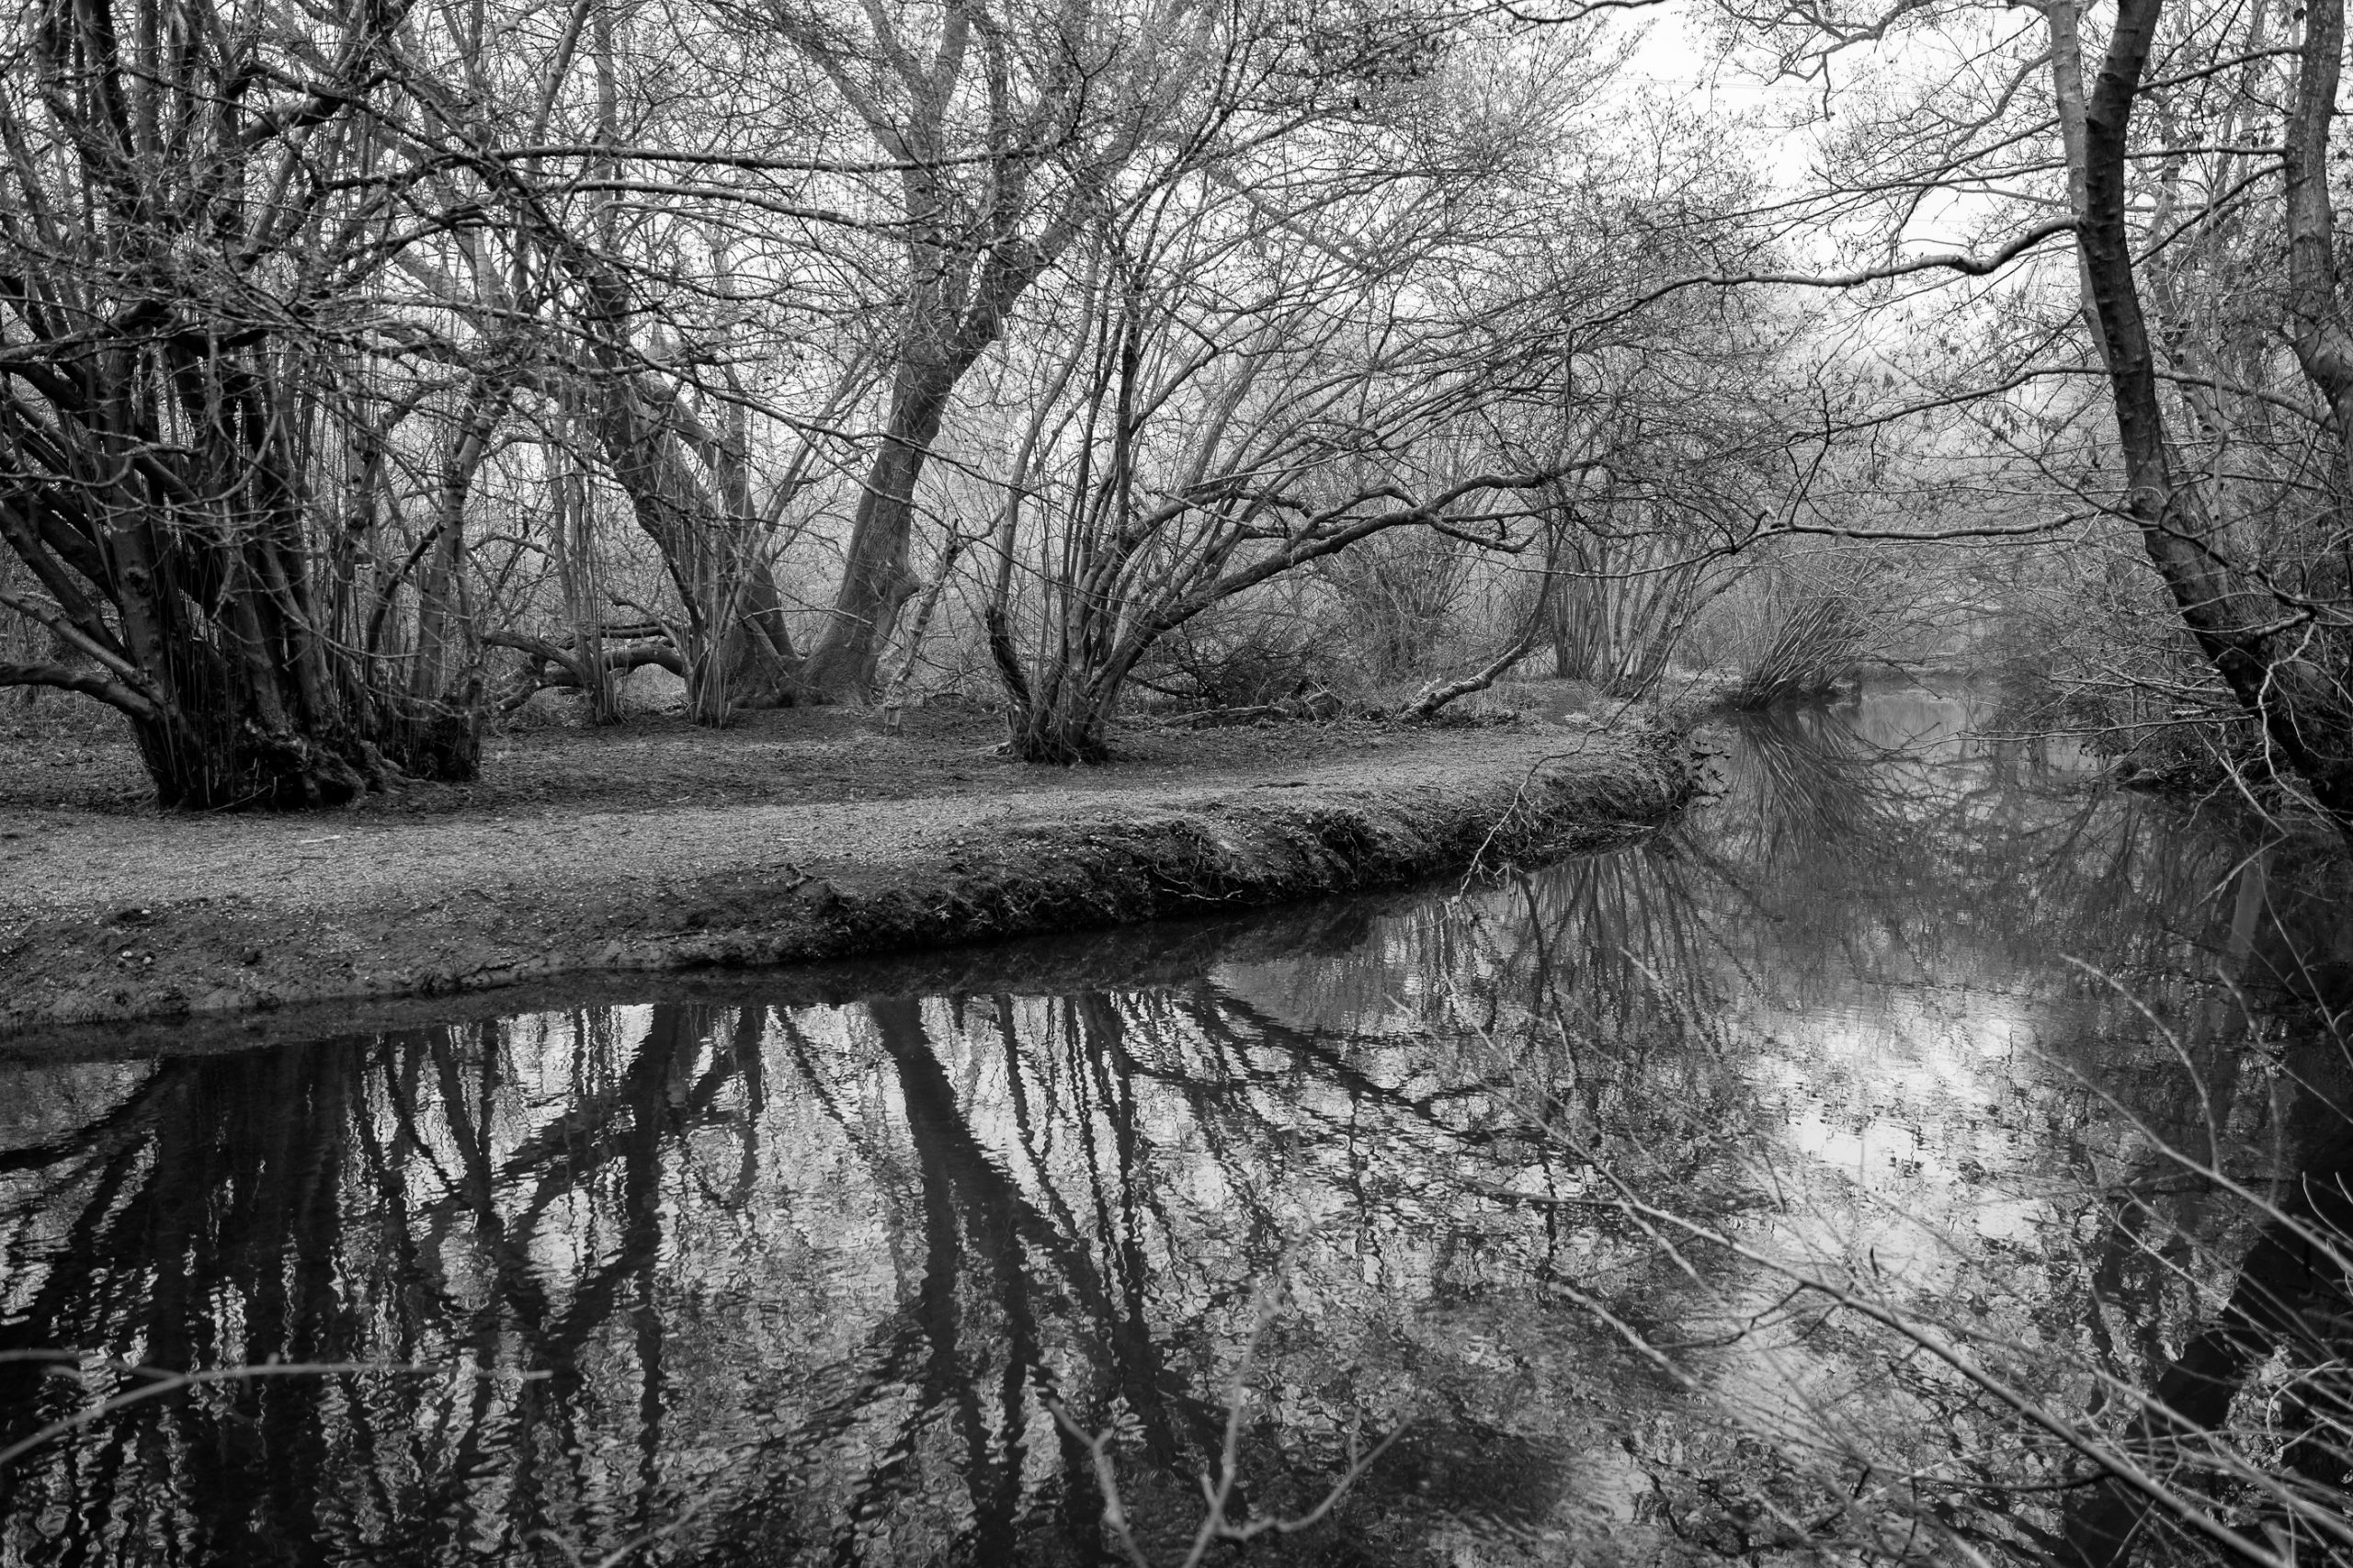 Black and white reflections in the river